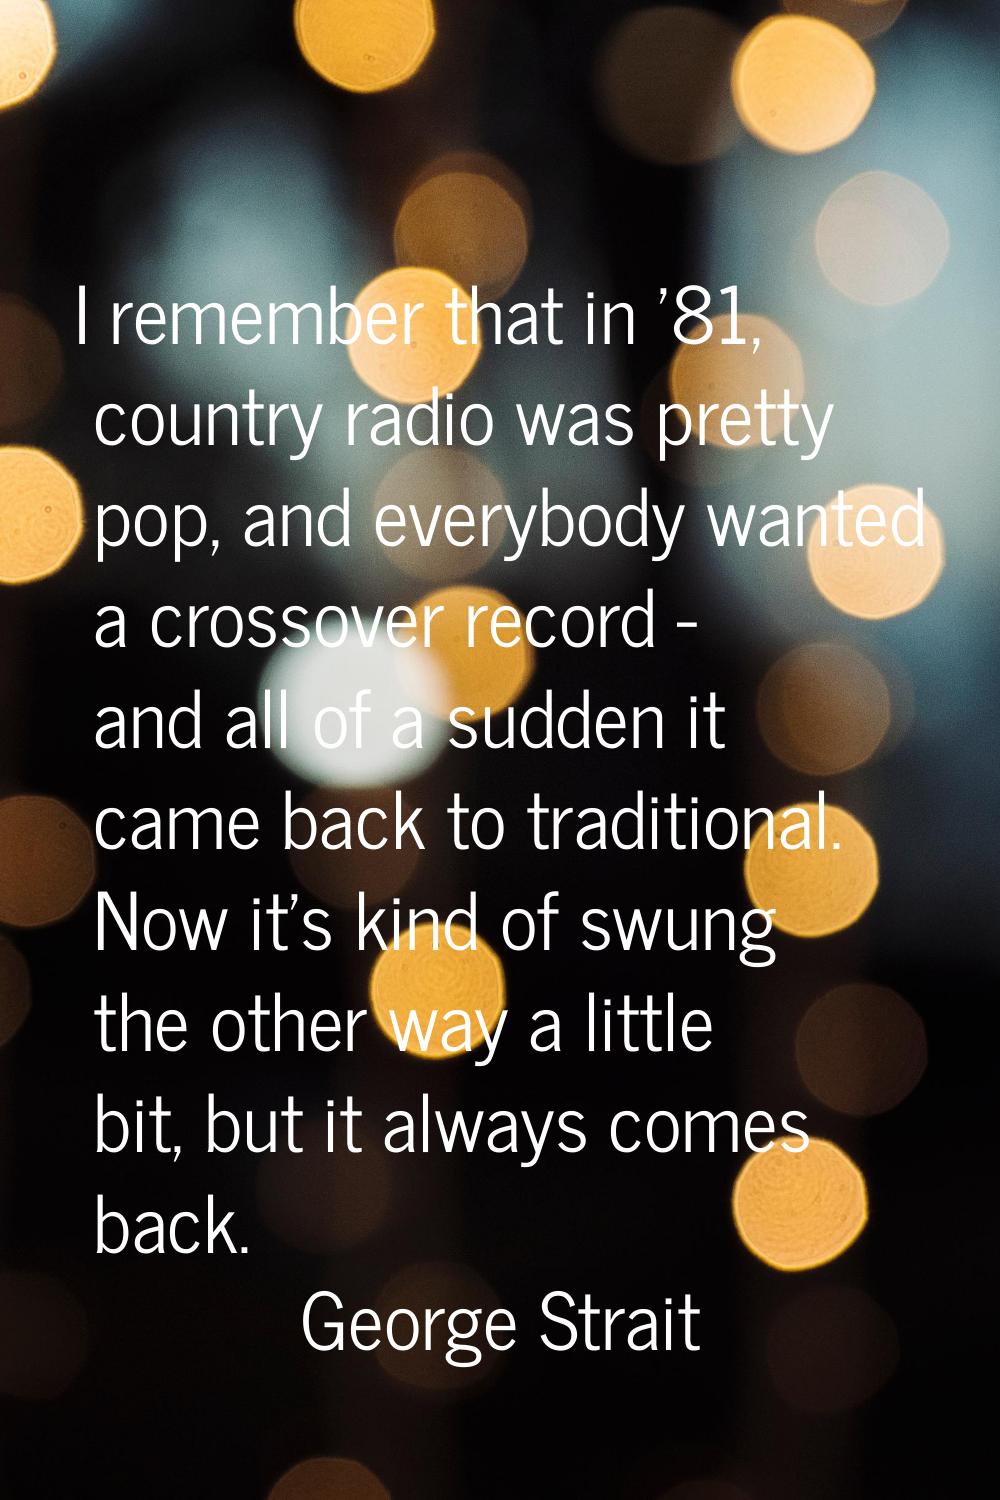 I remember that in '81, country radio was pretty pop, and everybody wanted a crossover record - and